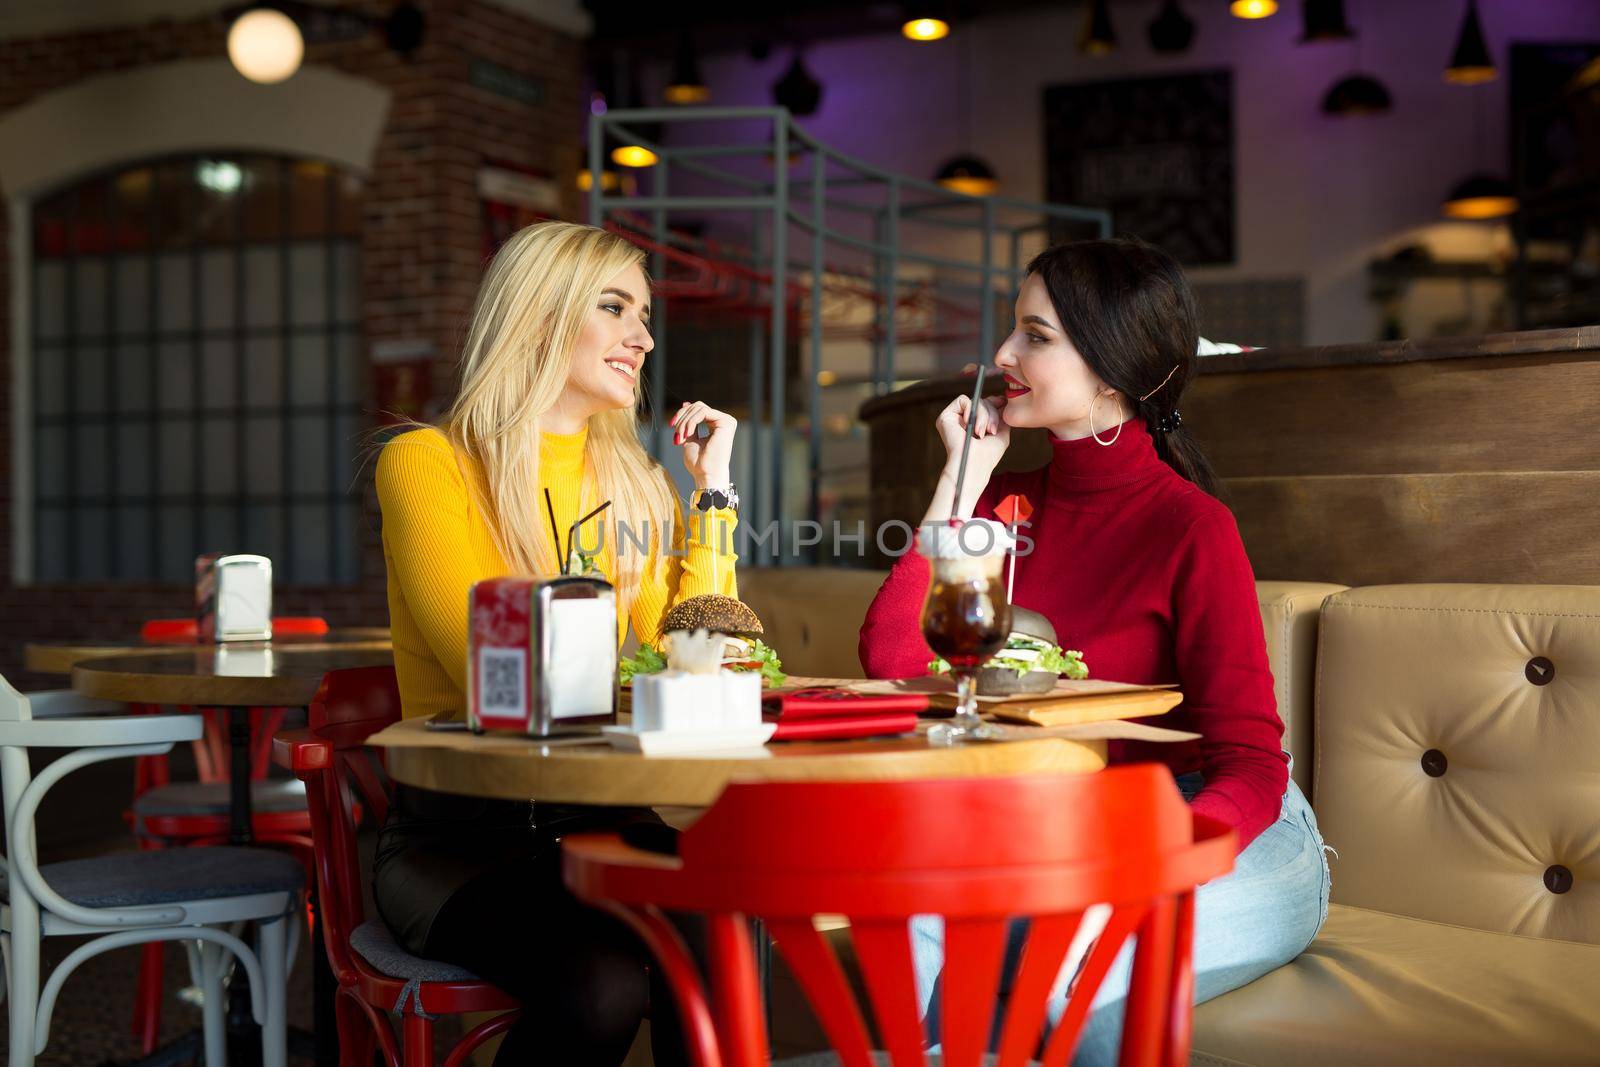 Two young women chatting in a cafe